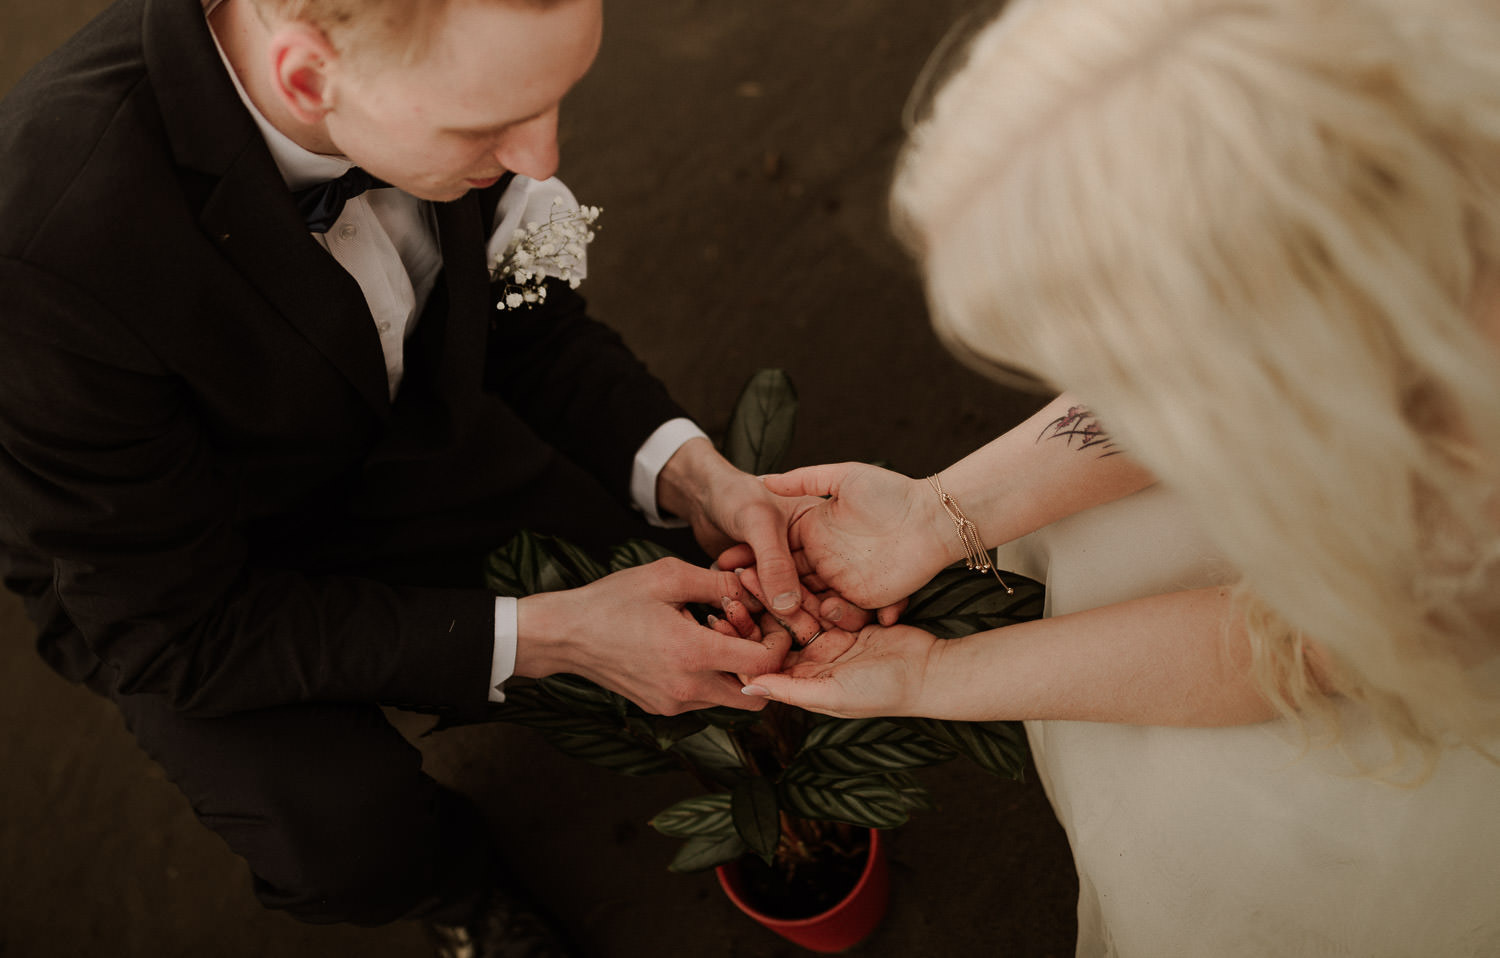 Eloping couple hold hands covering in dirt after potting a new plant together for their unity ceremony in their elopement